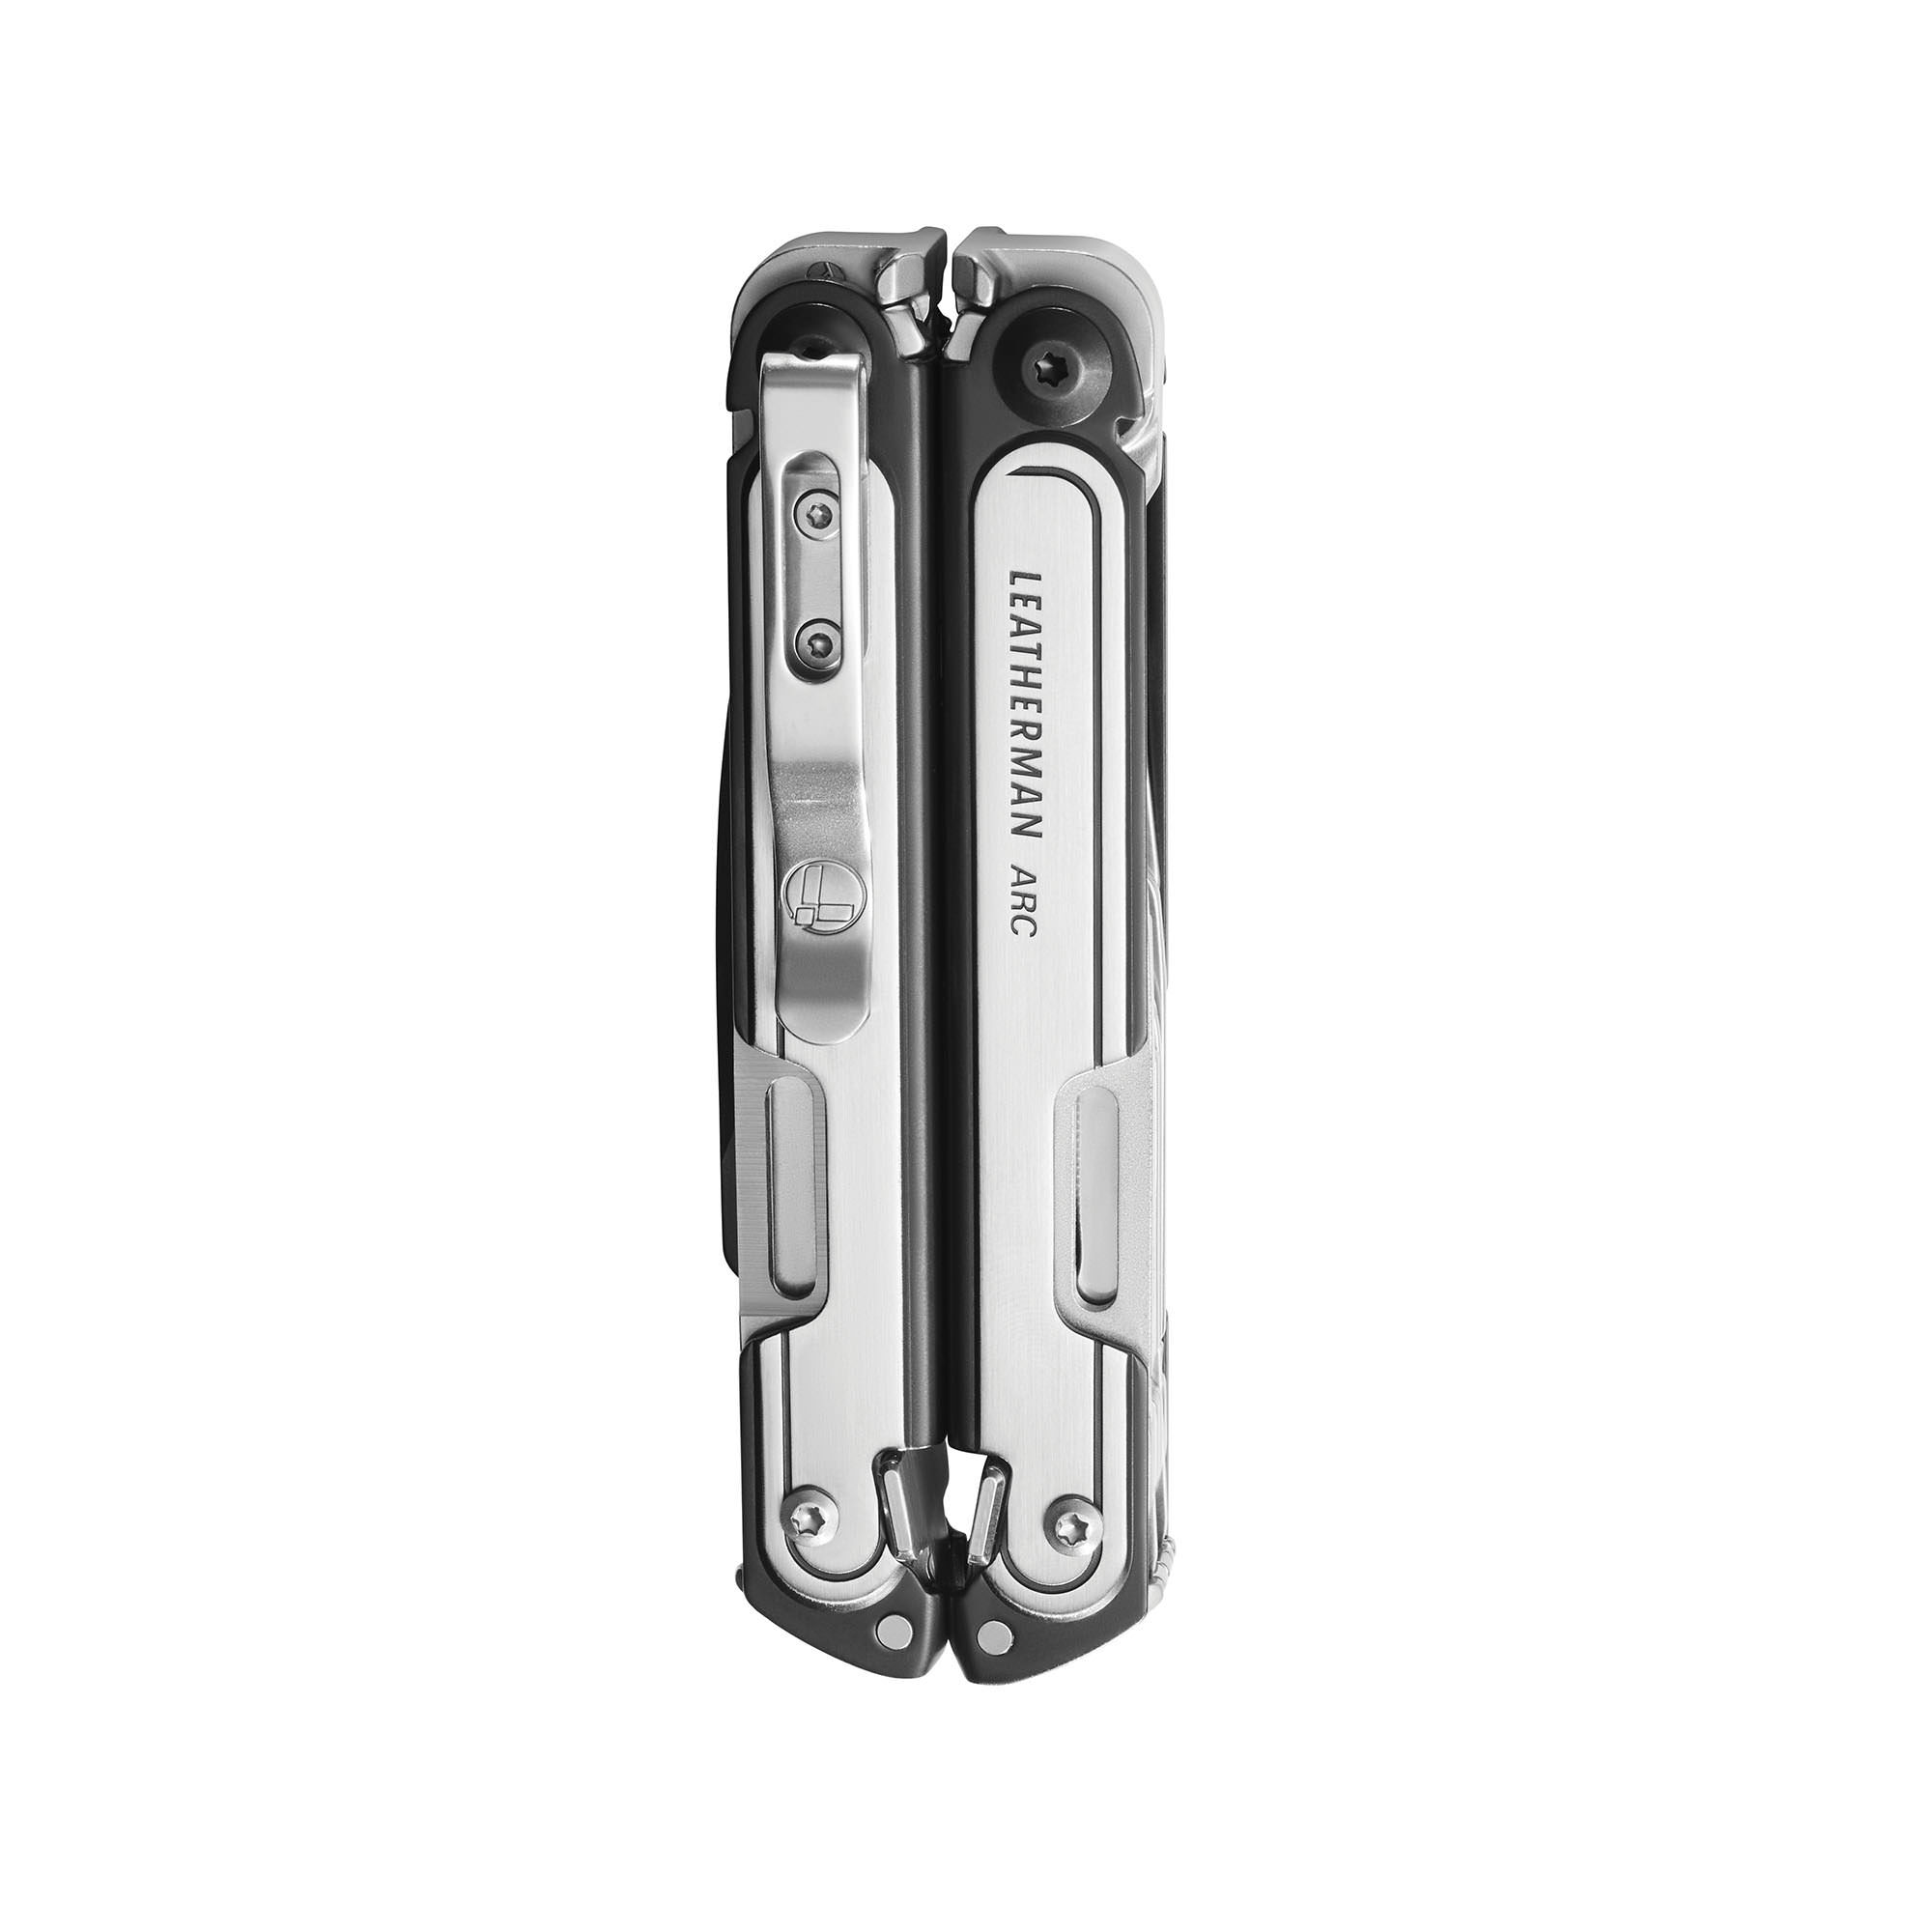 Multi-Tool Utility case - Clear case/Black tools